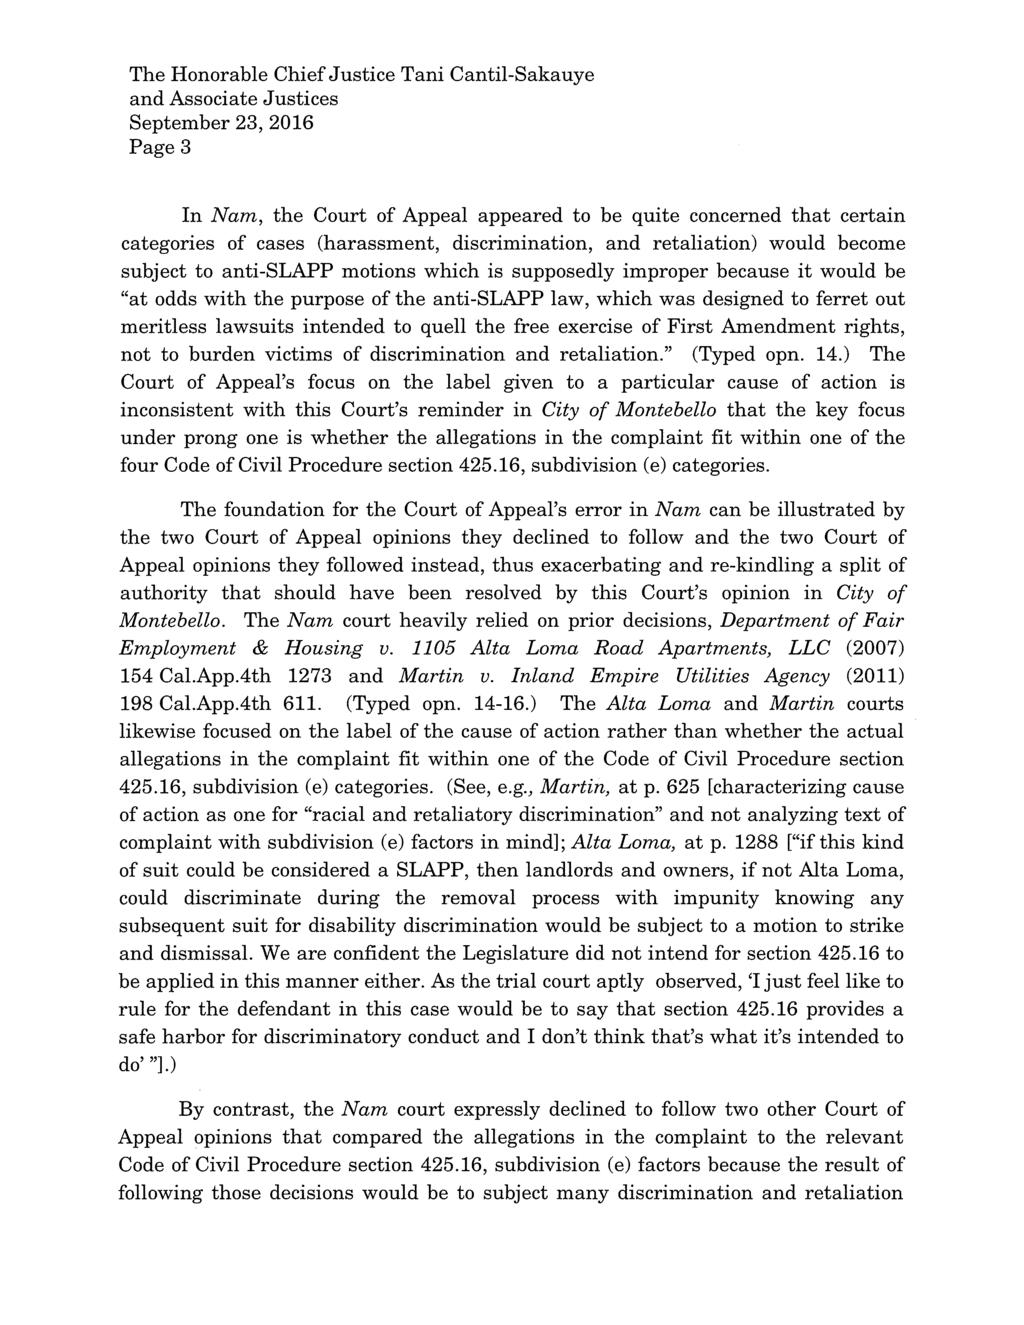 Page 3 In Nam, the Court of Appeal appeared to be quite concerned that certain categories of cases (harassment, discrimination, and retaliation) would become subject to anti-slapp motions which is